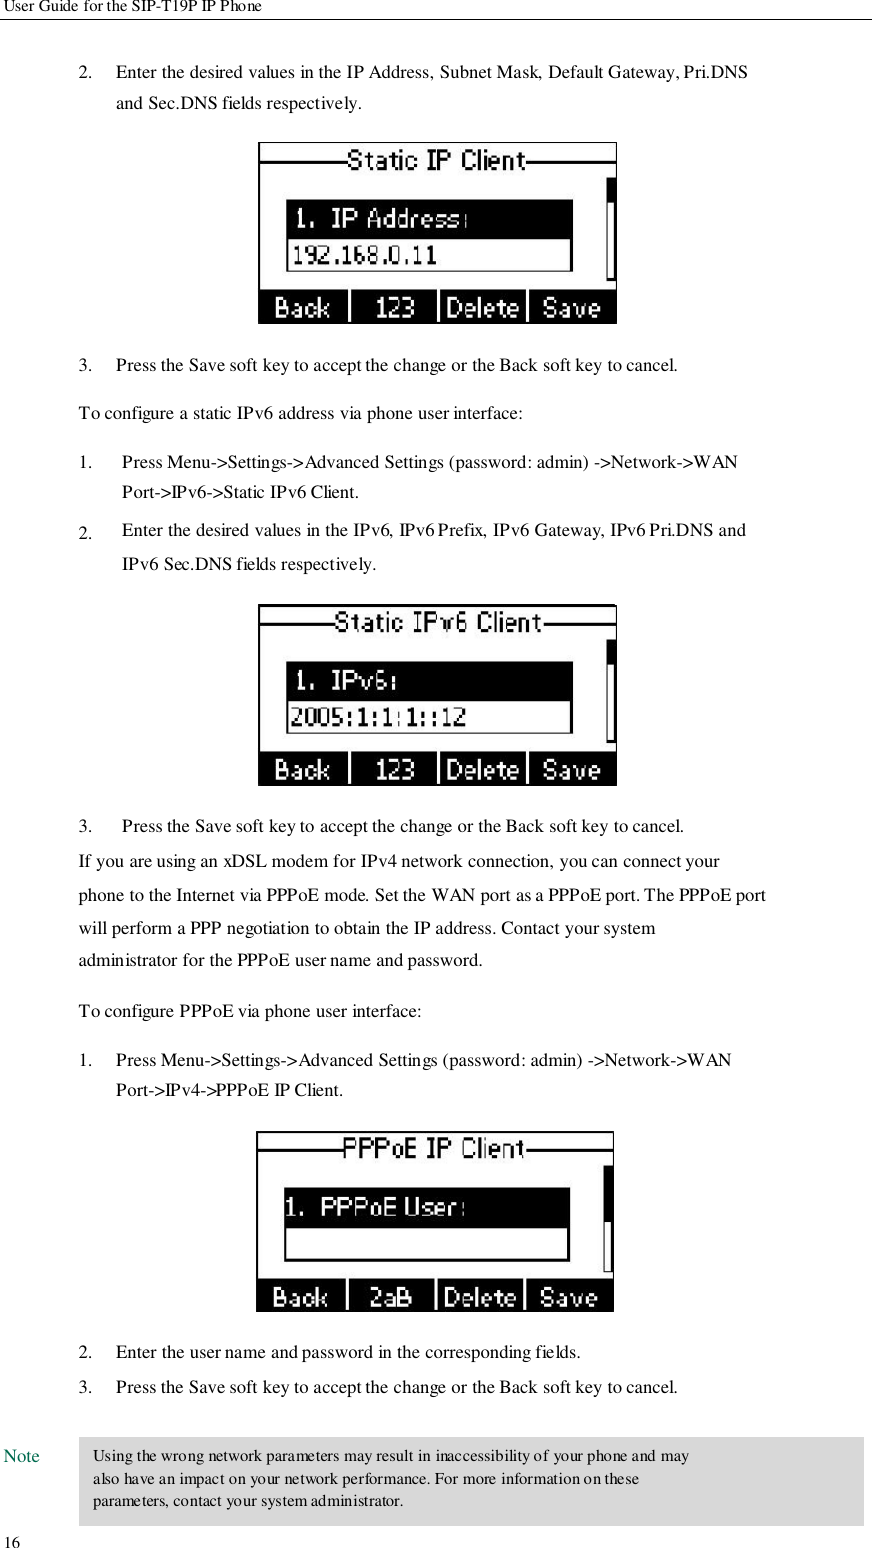           User Guide for the SIP-T19P IP Phone   2.             3.   Enter the desired values in the IP Address, Subnet Mask, Default Gateway, Pri.DNS and Sec.DNS fields respectively.            Press the Save soft key to accept the change or the Back soft key to cancel.  To configure a static IPv6 address via phone user interface:  1.   2.             3.  Press Menu-&gt;Settings-&gt;Advanced Settings (password: admin) -&gt;Network-&gt;WAN Port-&gt;IPv6-&gt;Static IPv6 Client. Enter the desired values in the IPv6, IPv6 Prefix, IPv6 Gateway, IPv6 Pri.DNS and IPv6 Sec.DNS fields respectively.            Press the Save soft key to accept the change or the Back soft key to cancel. If you are using an xDSL modem for IPv4 network connection, you can connect your phone to the Internet via PPPoE mode. Set the WAN port as a PPPoE port. The PPPoE port will perform a PPP negotiation to obtain the IP address. Contact your system administrator for the PPPoE user name and password.  To configure PPPoE via phone user interface:  1.             2. 3.  Press Menu-&gt;Settings-&gt;Advanced Settings (password: admin) -&gt;Network-&gt;WAN Port-&gt;IPv4-&gt;PPPoE IP Client.            Enter the user name and password in the corresponding fields. Press the Save soft key to accept the change or the Back soft key to cancel.  Note    16   Using the wrong network parameters may result in inaccessibility of your phone and may also have an impact on your network performance. For more information on these parameters, contact your system administrator.